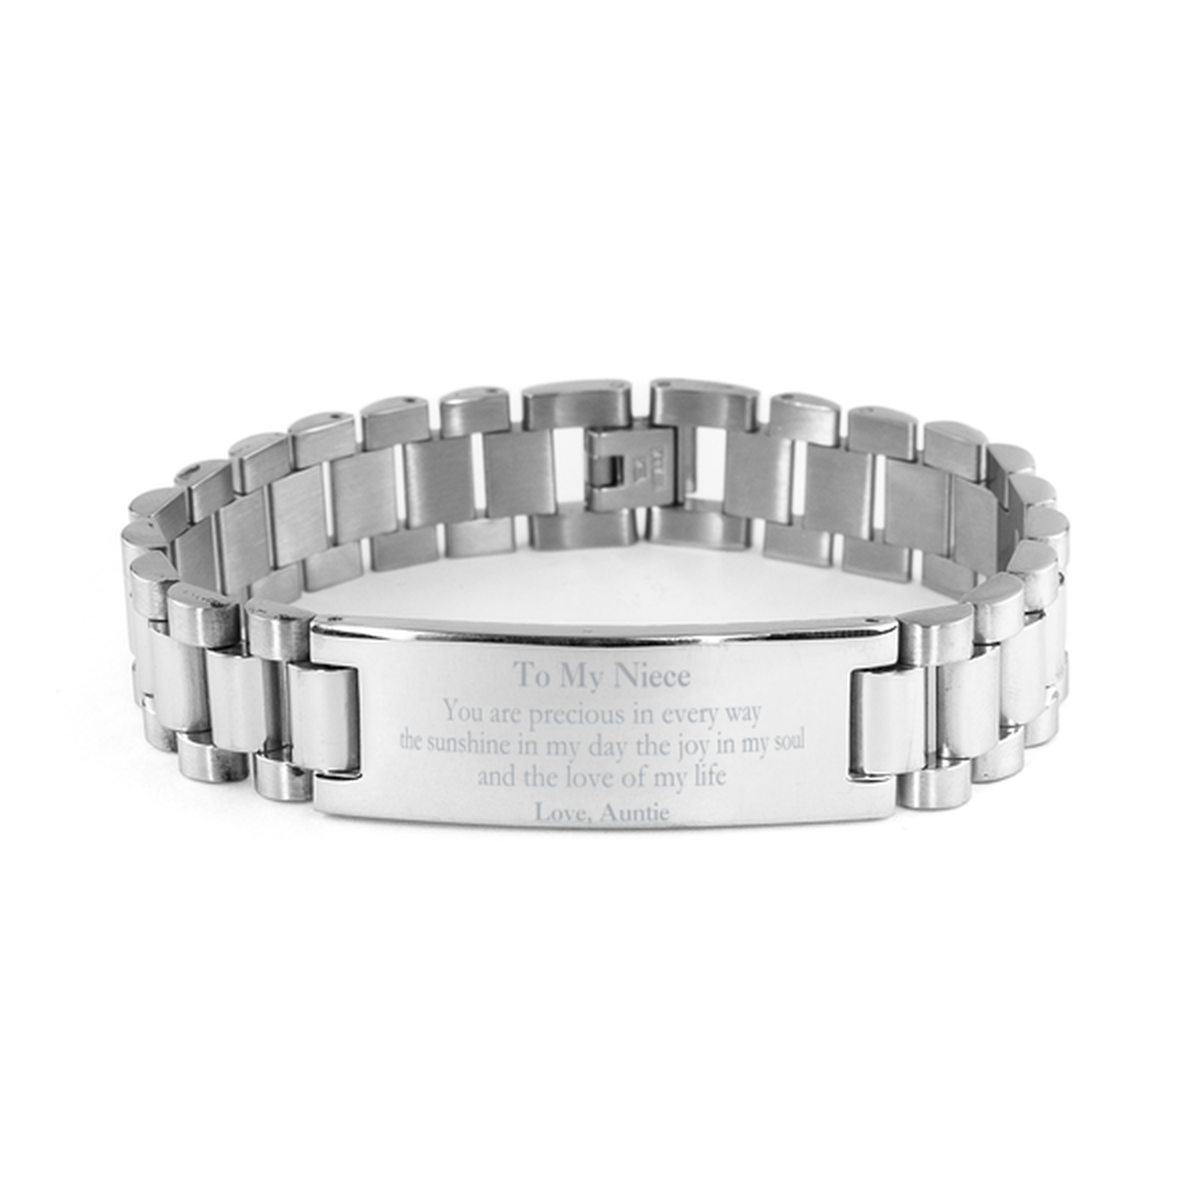 Graduation Gifts for Niece Ladder Stainless Steel Bracelet Present from Auntie, Christmas Niece Birthday Gifts Niece You are precious in every way the sunshine in my day. Love, Auntie